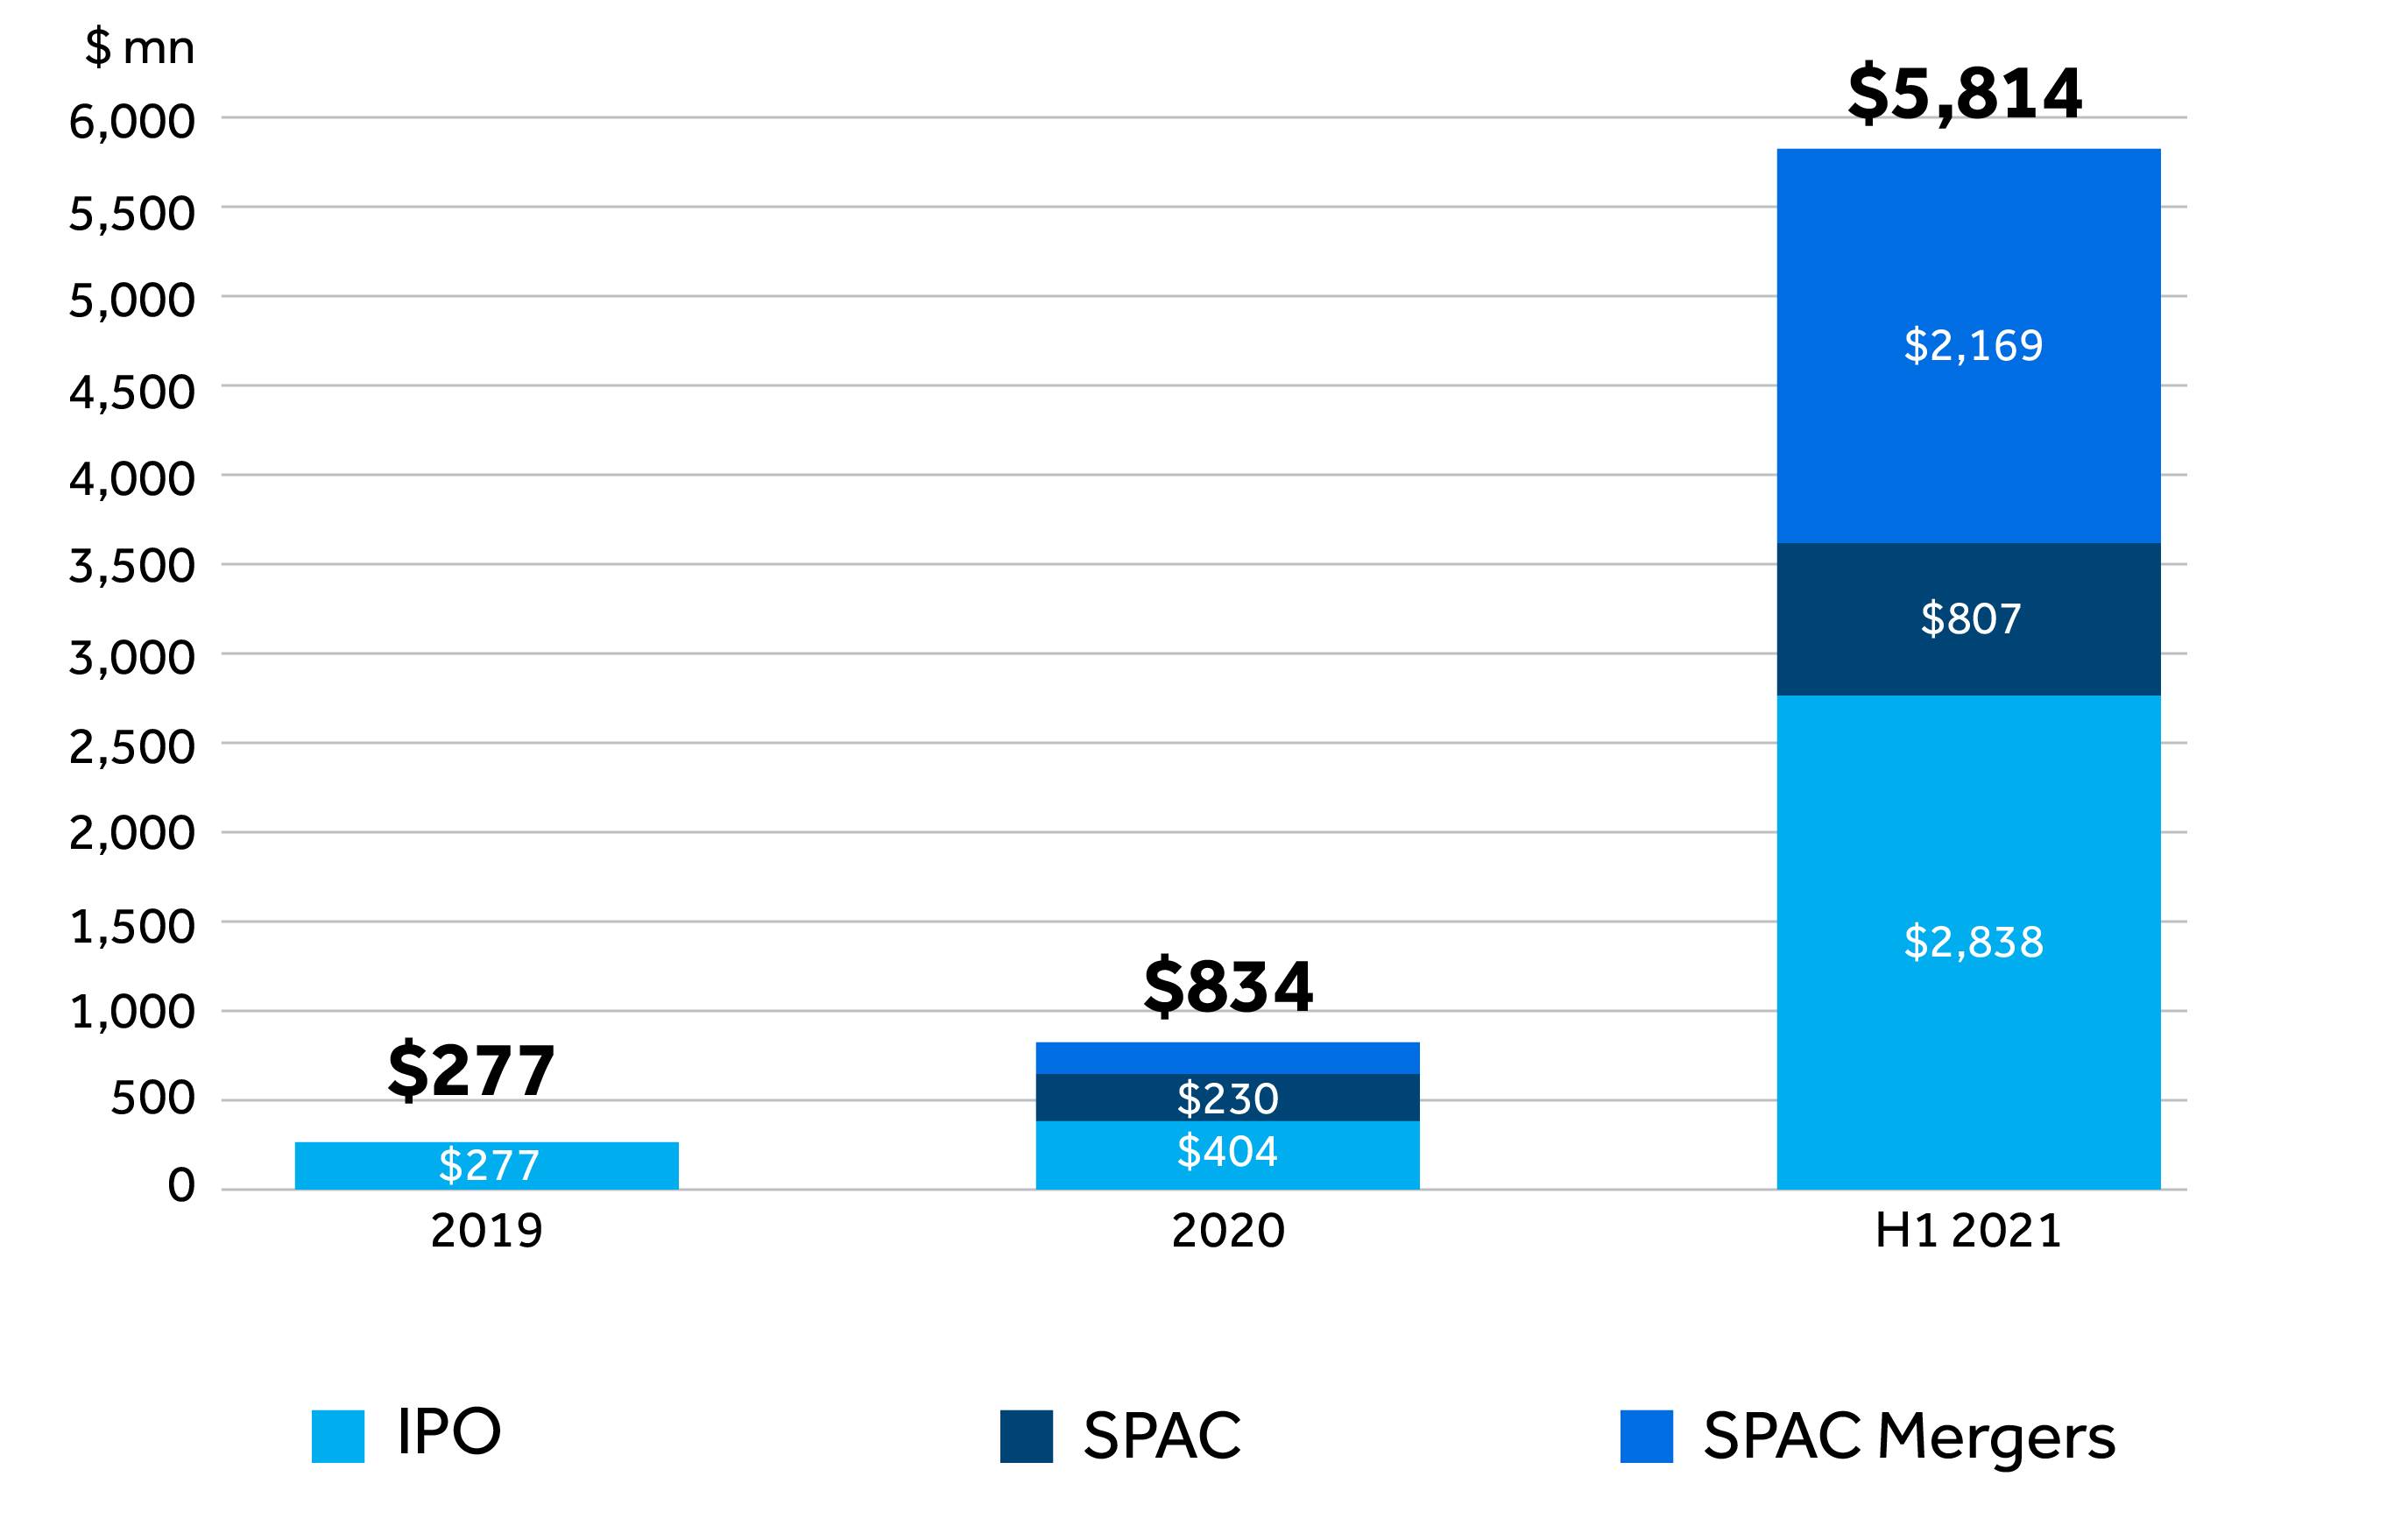 Stacked bar chart showing the volume of capital invested in AgTech companies via IPOs, SPACs and SPAC Mergers per annum from 2019 to 2021.